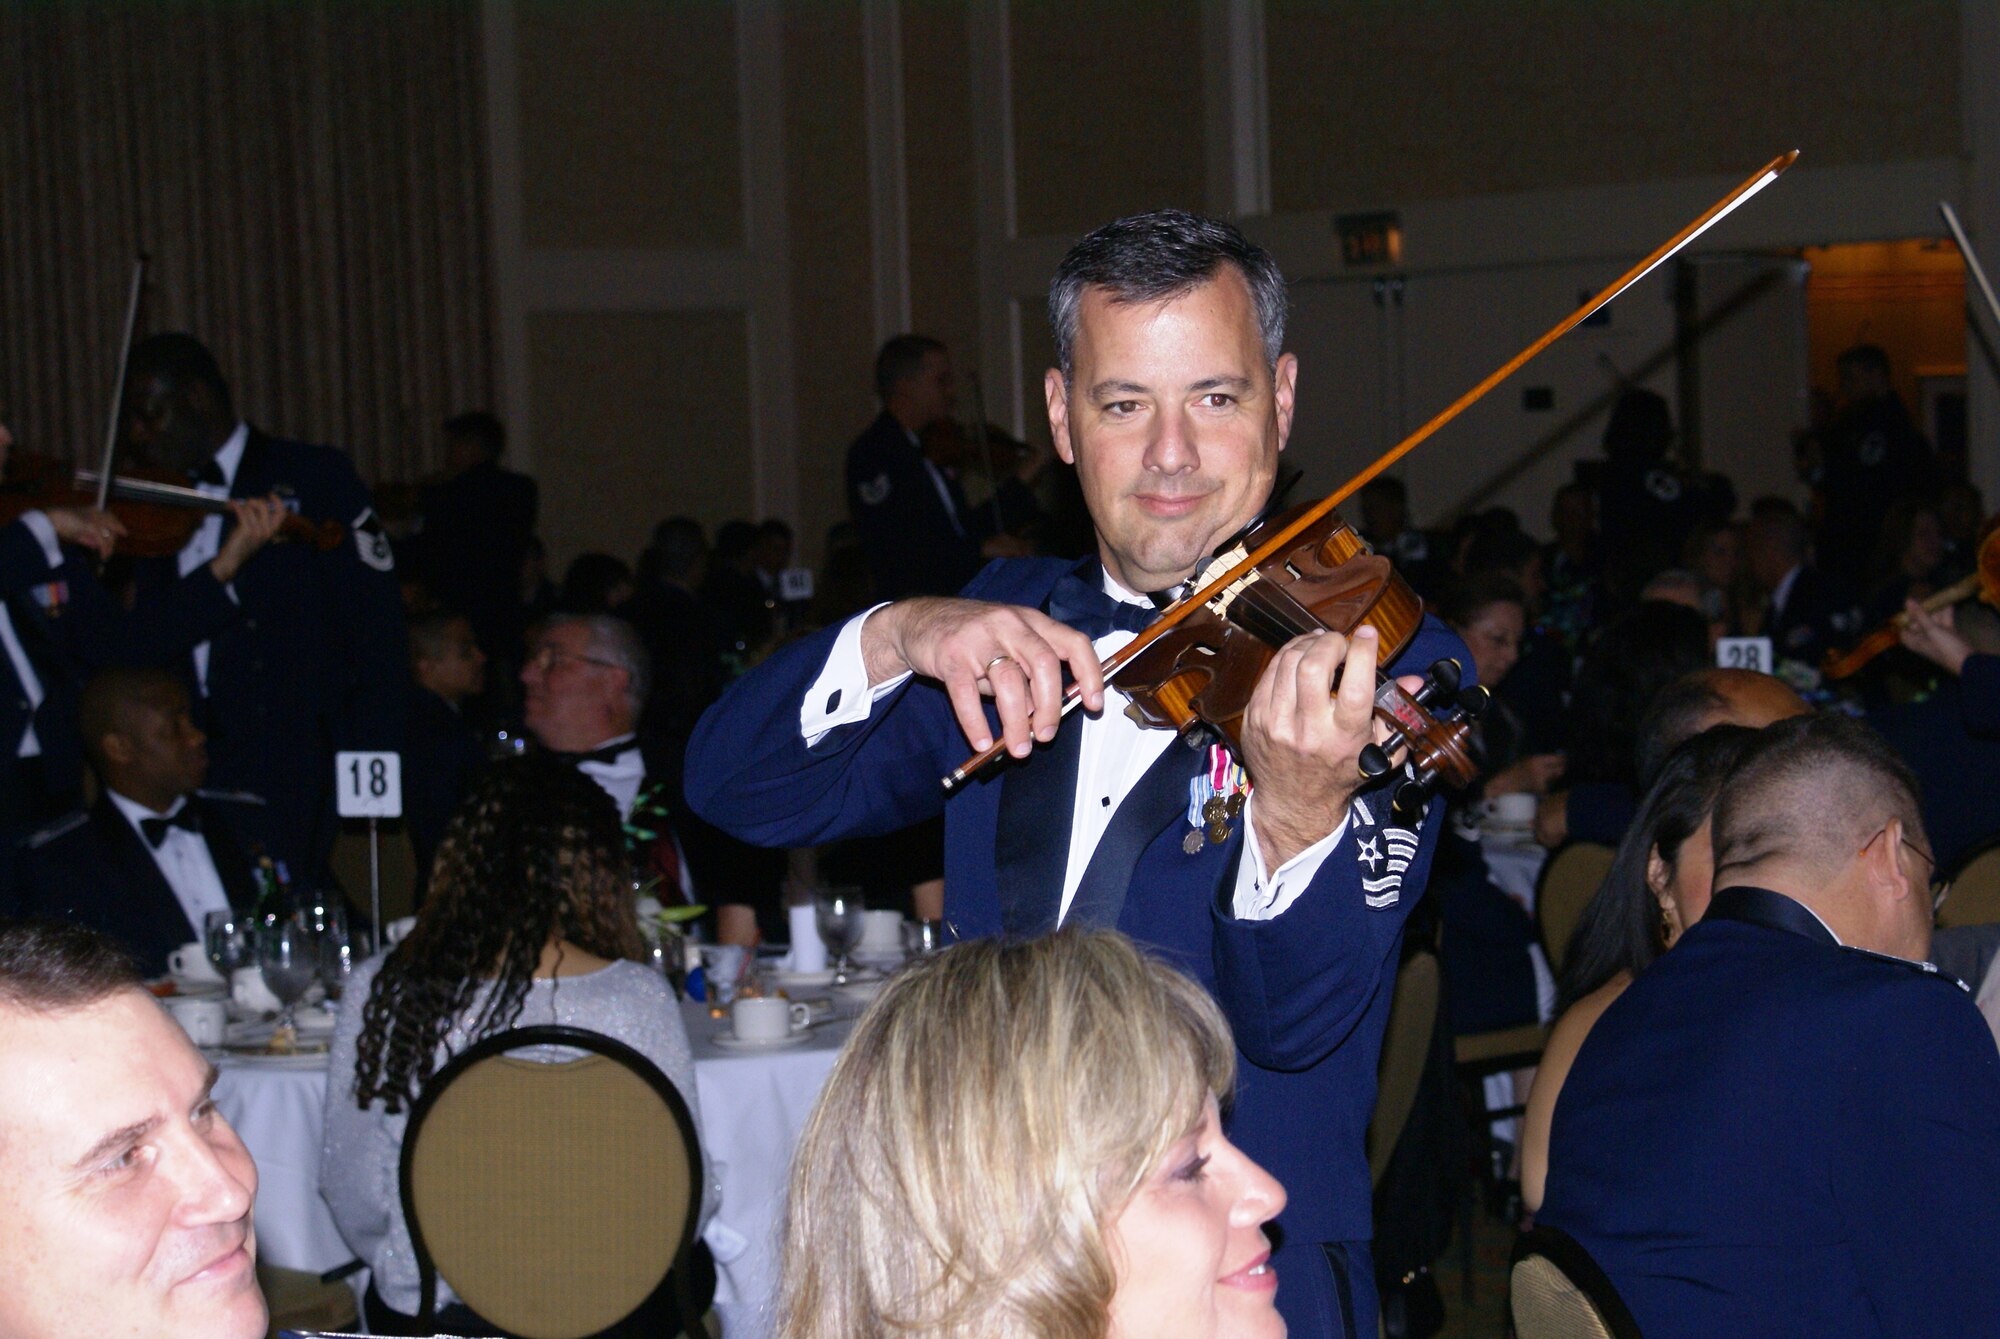 SMSgt William Tortolano, of The Air Force Strings plays violin for over 500 military and civilian personnel attending Homestead Air Reserve Base’s "Heritage to Horizons" Air Force ball, Nov. 2, 2007. Since 1954, The Air Force Strolling Strings has had the honor of performing at the White House for every president from Eisenhower to Clinton. The Air Force Strings is one of the most diverse and flexible units of The United States Air Force Band. The night’s event was part of a year long celebration commemorating the 60th Anniversary of the U.S. Air Force and recently deployed military members. The gala was co-hosted by the 482nd Fighter Wing, Homestead ARB, Fla., and the Greater Homestead/Florida City Chamber of Commerce Military Affairs Committee. (U.S. Air Force photo/Tim Norton)